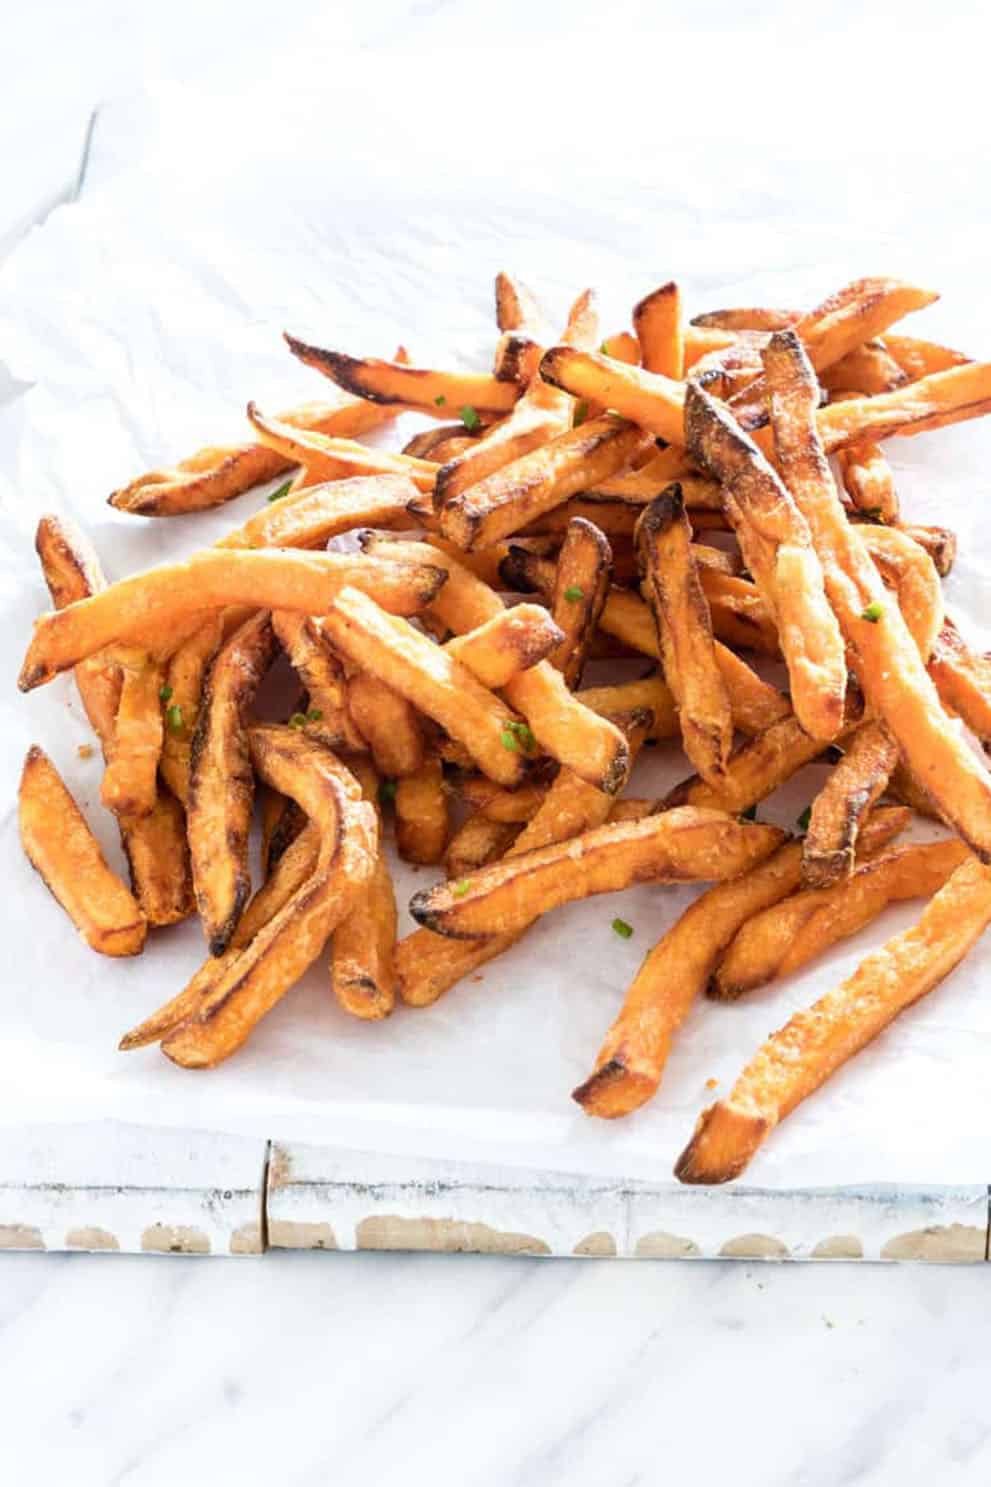  AIR FRYER SWEET POTATOES FRIES by Recipes from a Pantry: These delicious and easy vegan appetizers are so easy to make, inexpensive and perfect for a party!